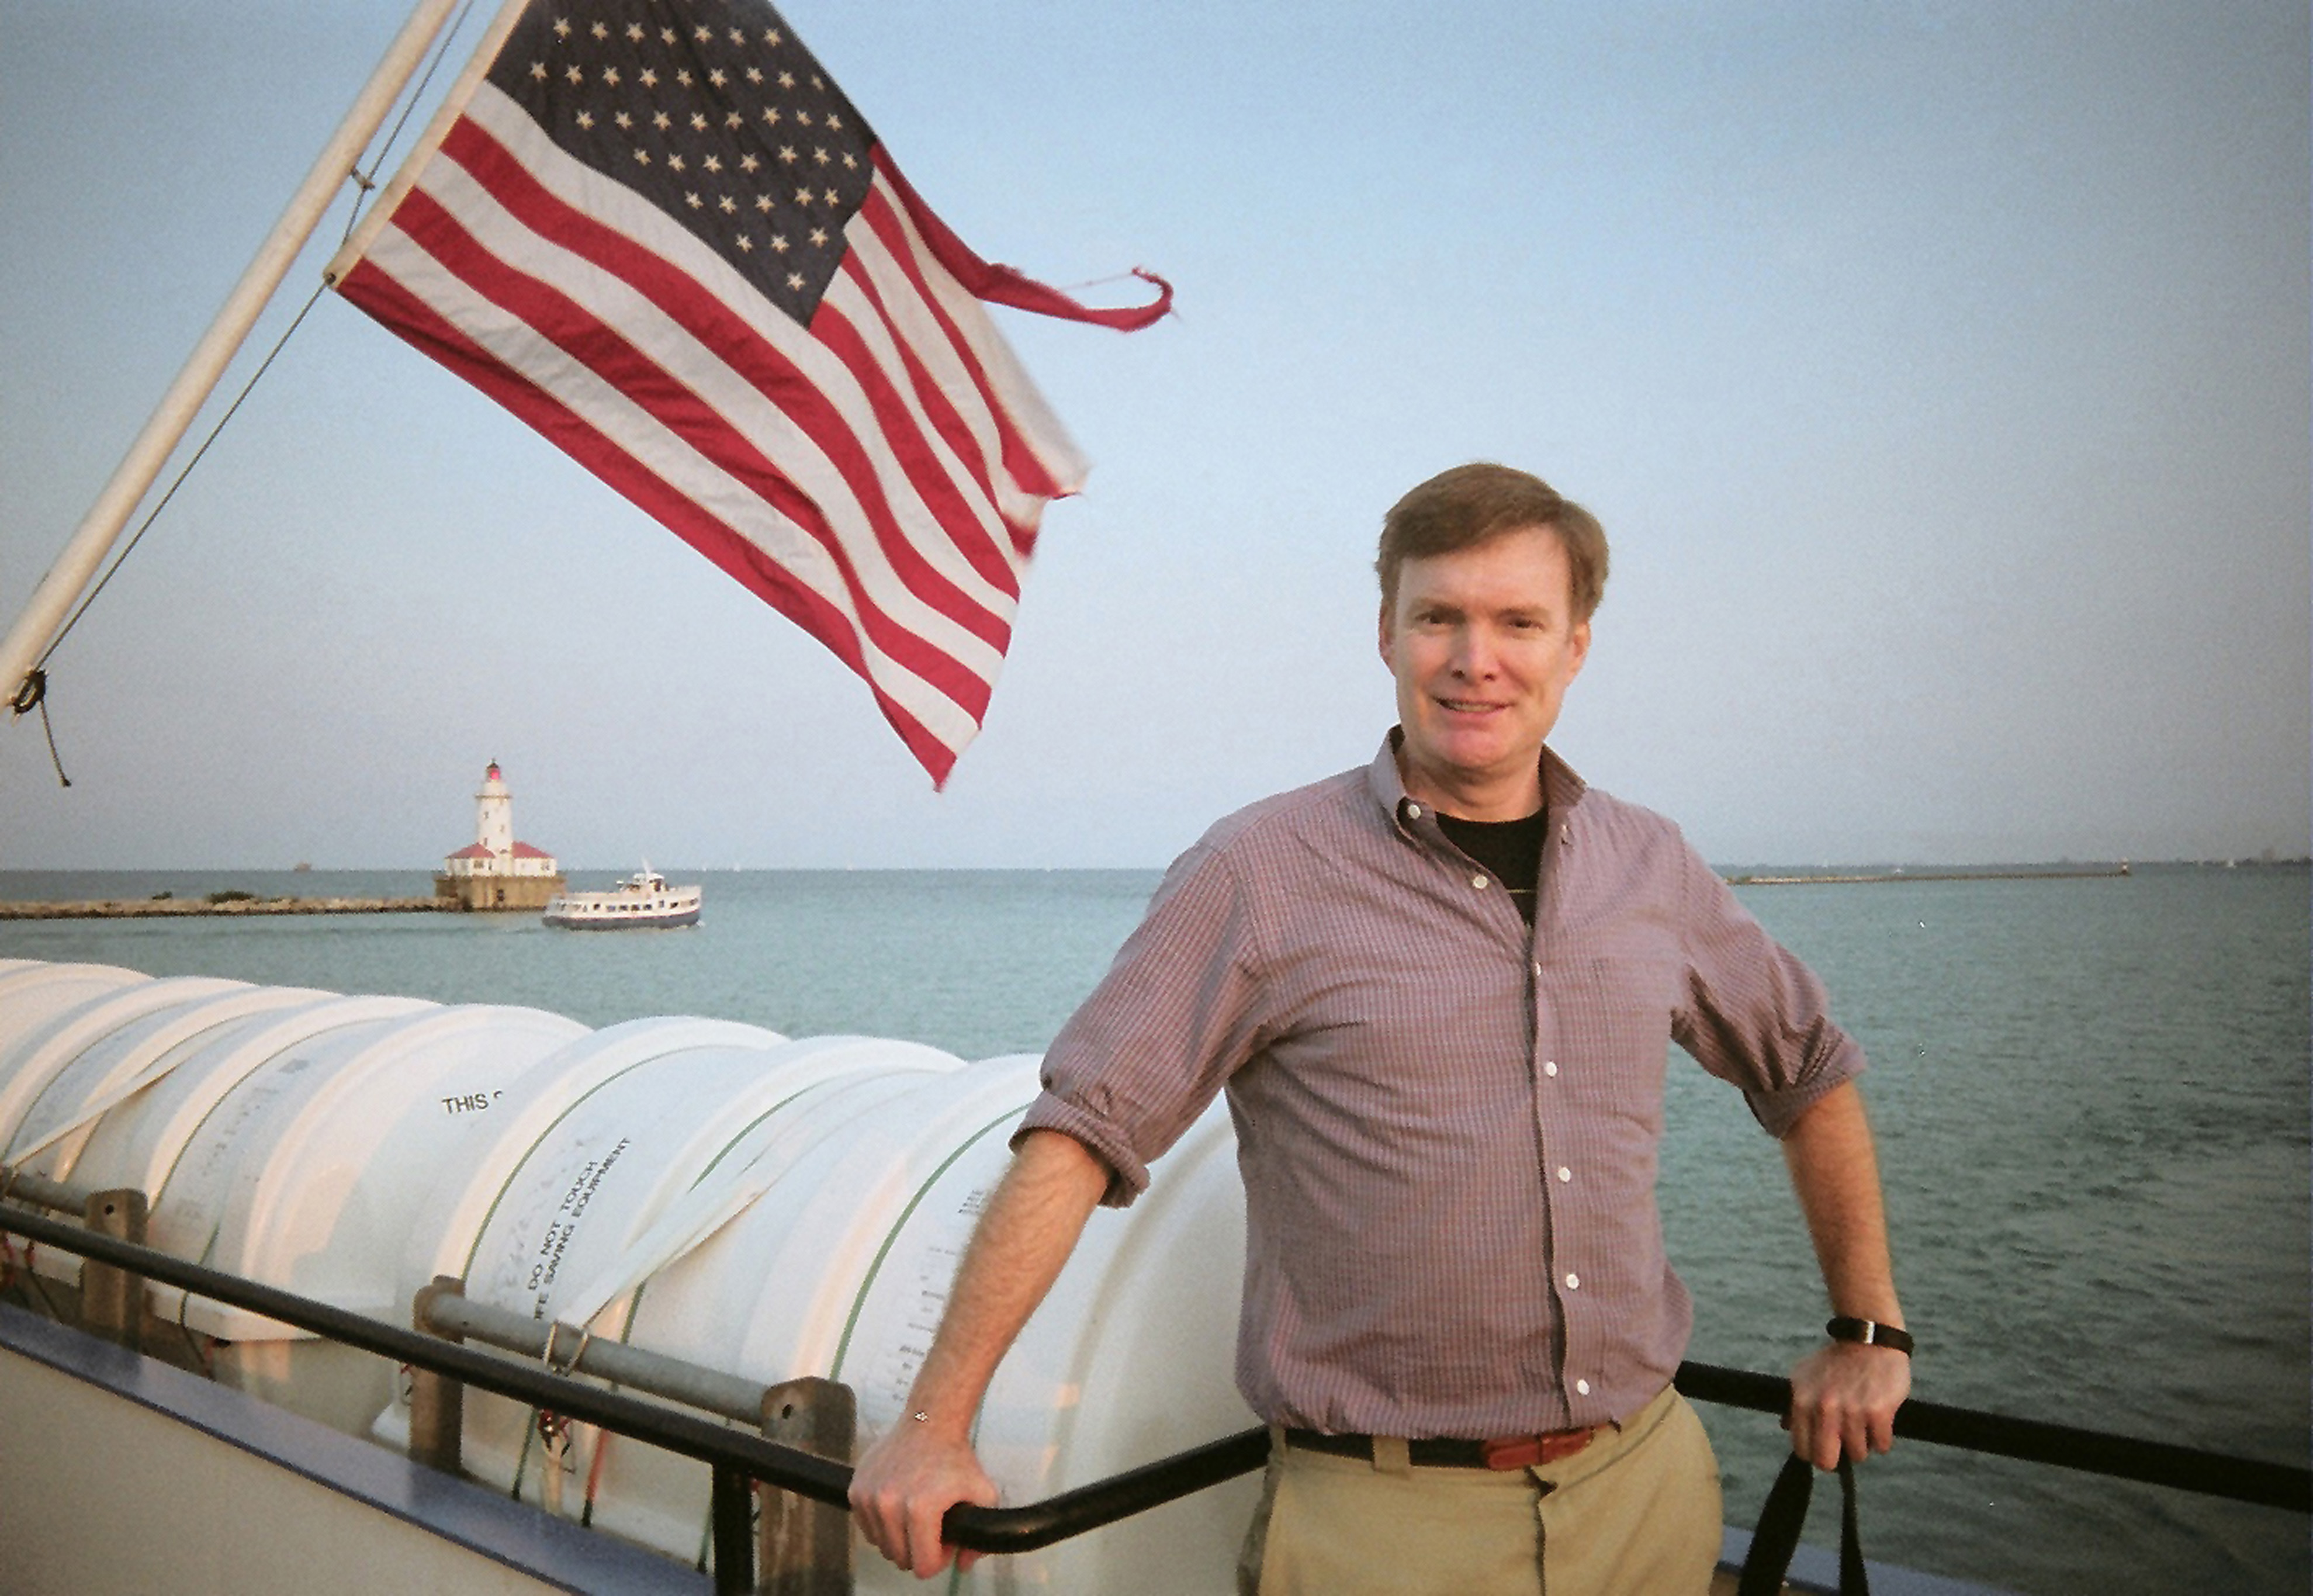 Here I am on the Mystic Blue cruise ship in front of the American flag.